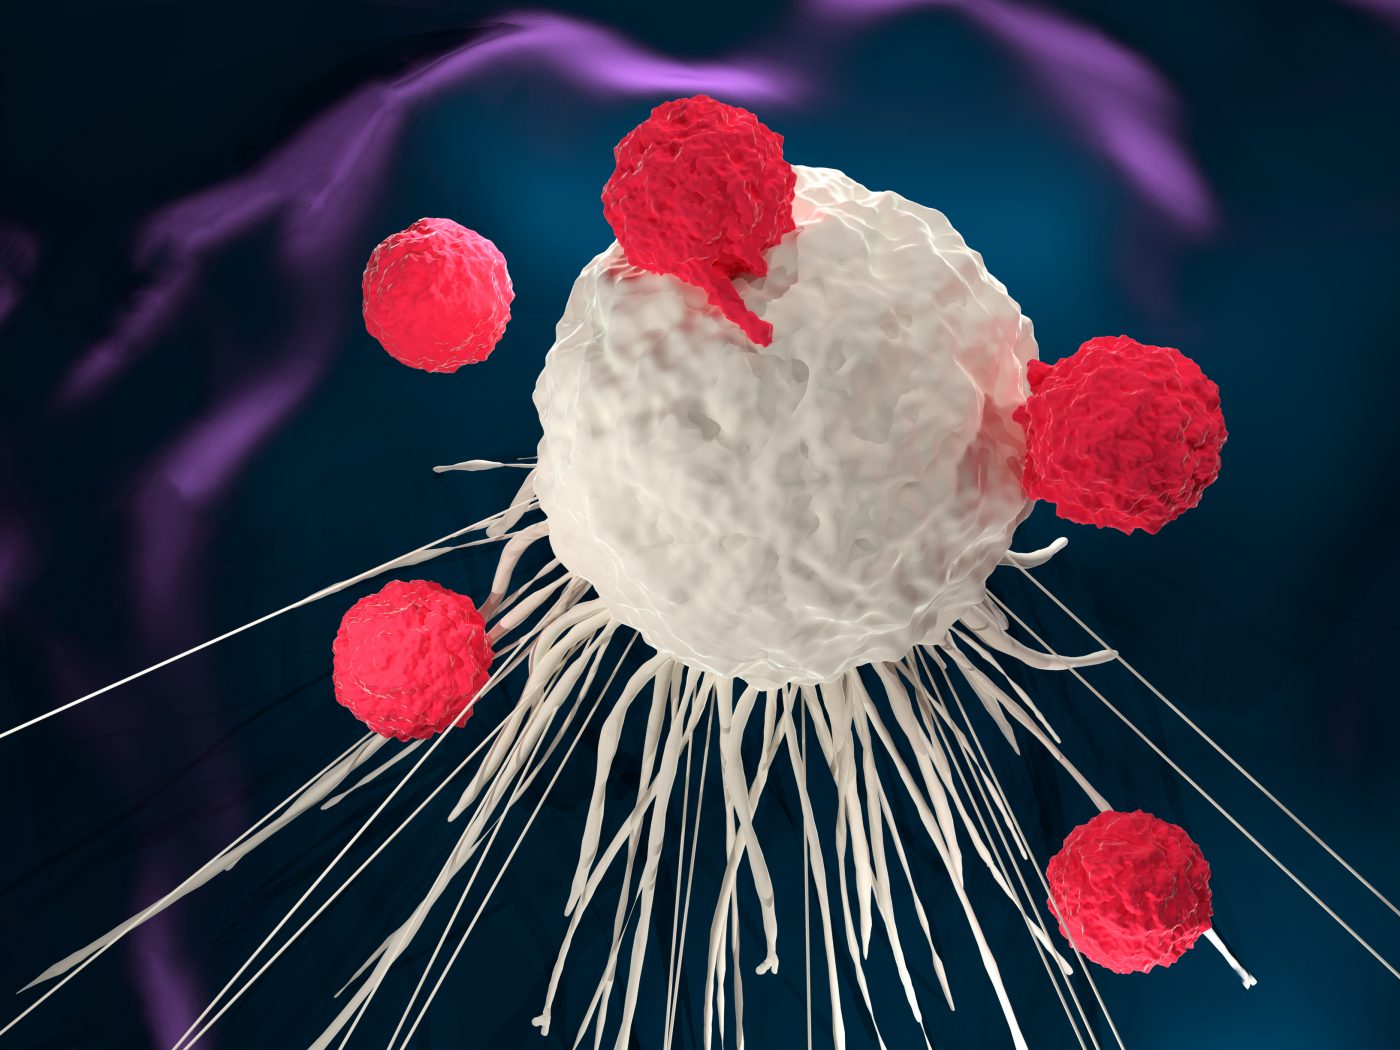 Immunotherapy Boosted to Eliminate Cancers in Mouse Model